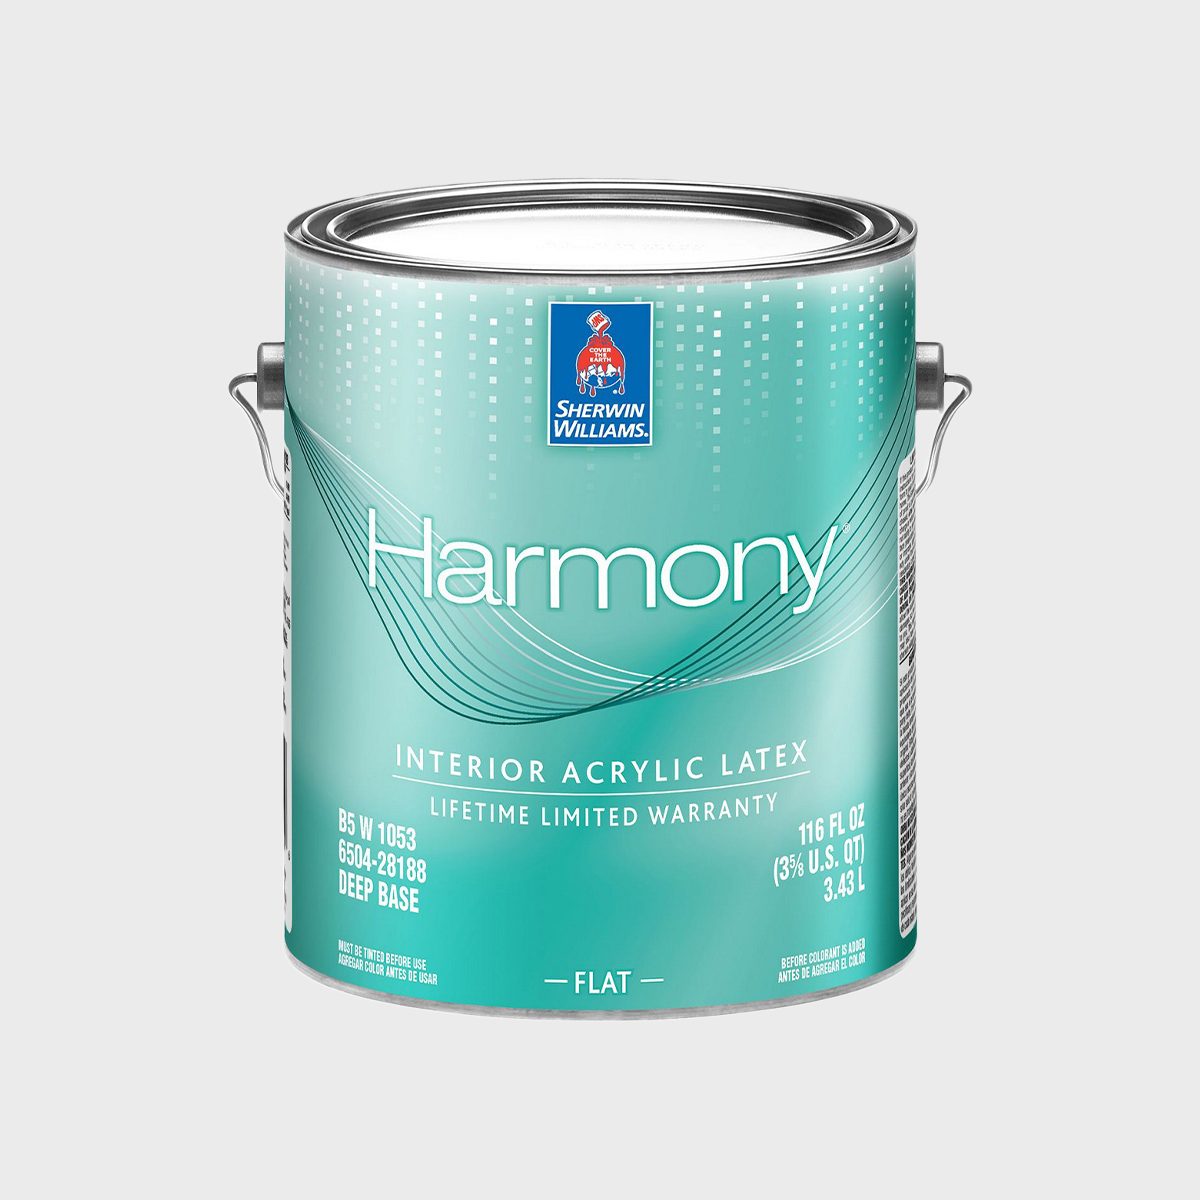 9 Best Paints for Interior Walls | The Family Handyman